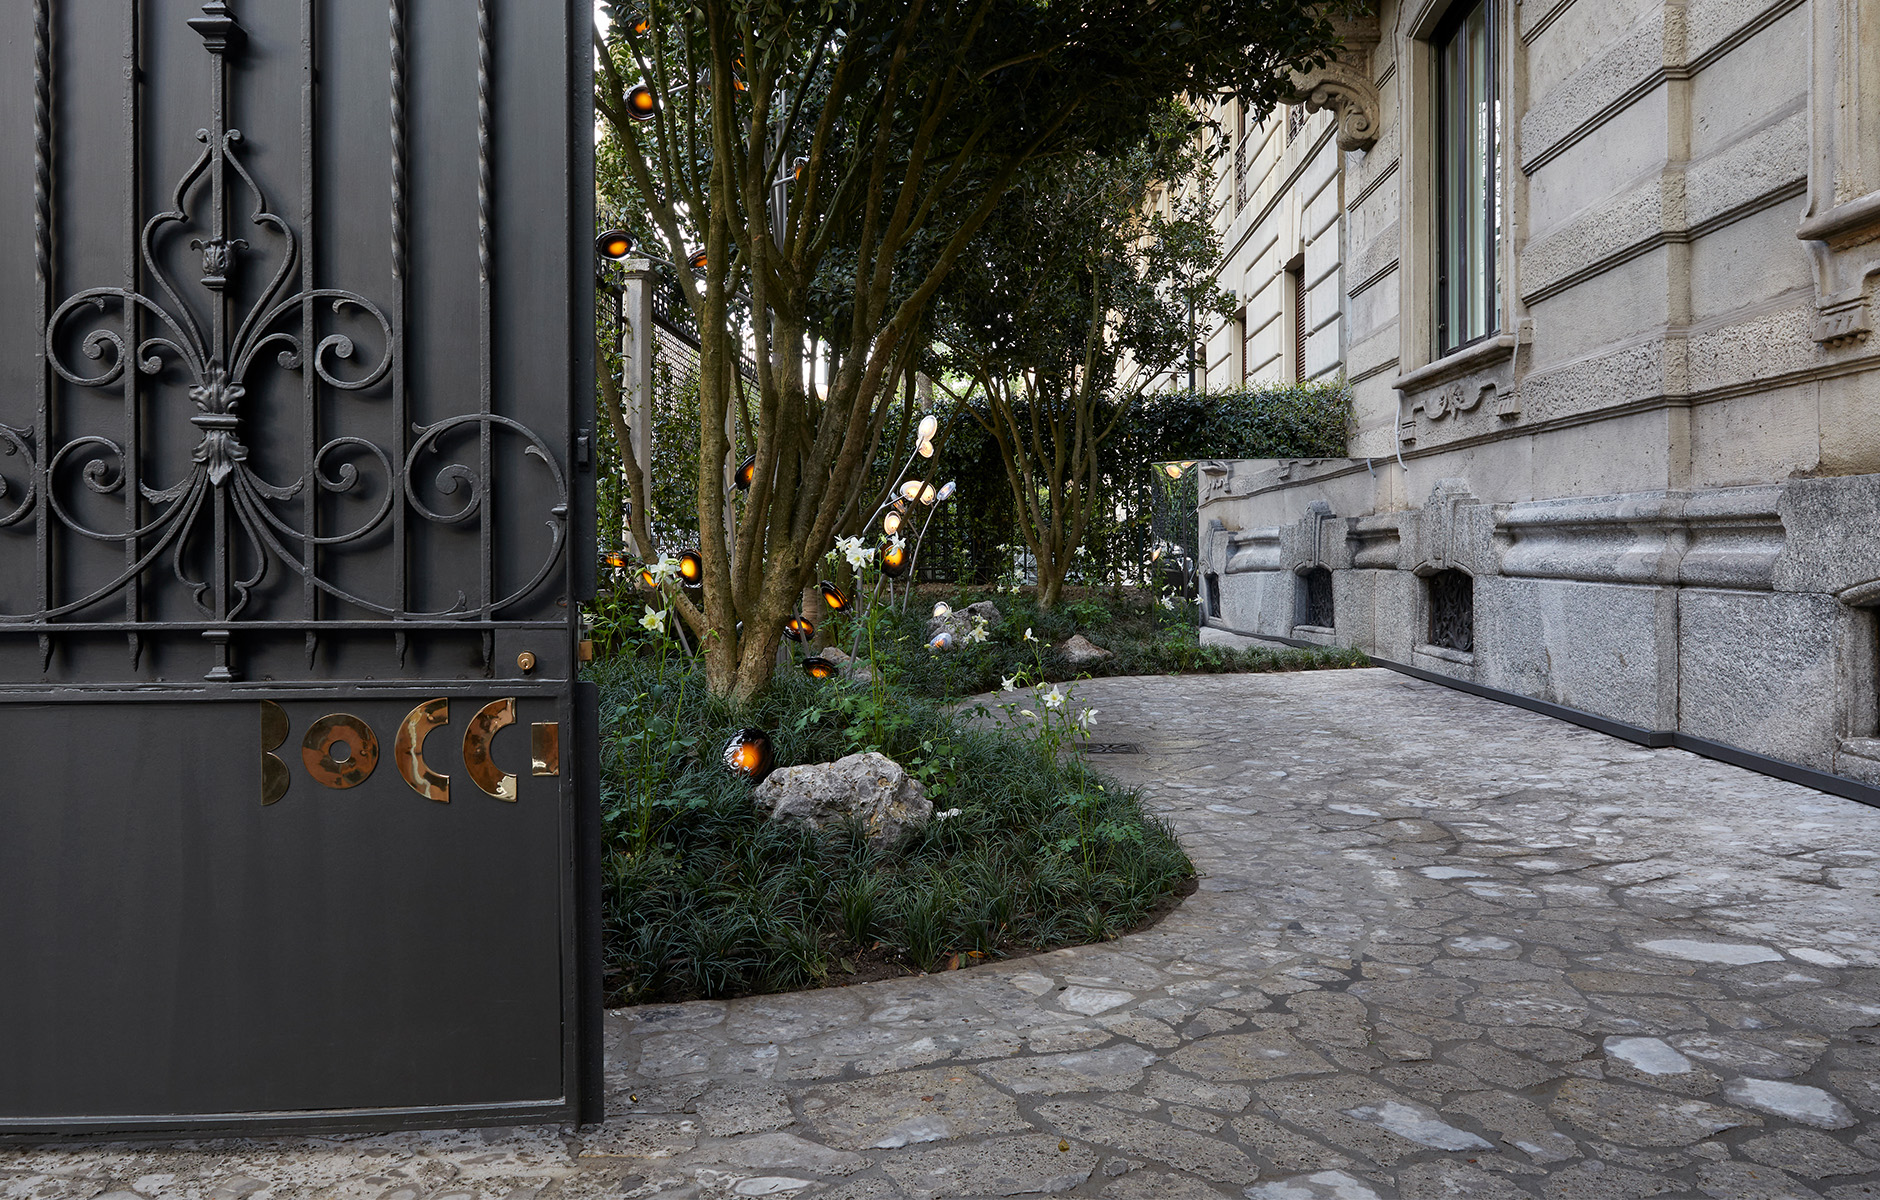 Canadian lighting brand Bocci and its new home in Milan, an intimate early 20th building Italian apartment on Zona Vincenzo Monti with a garden that also featured their outdoor collection 16g. Photo c/o Bocci.